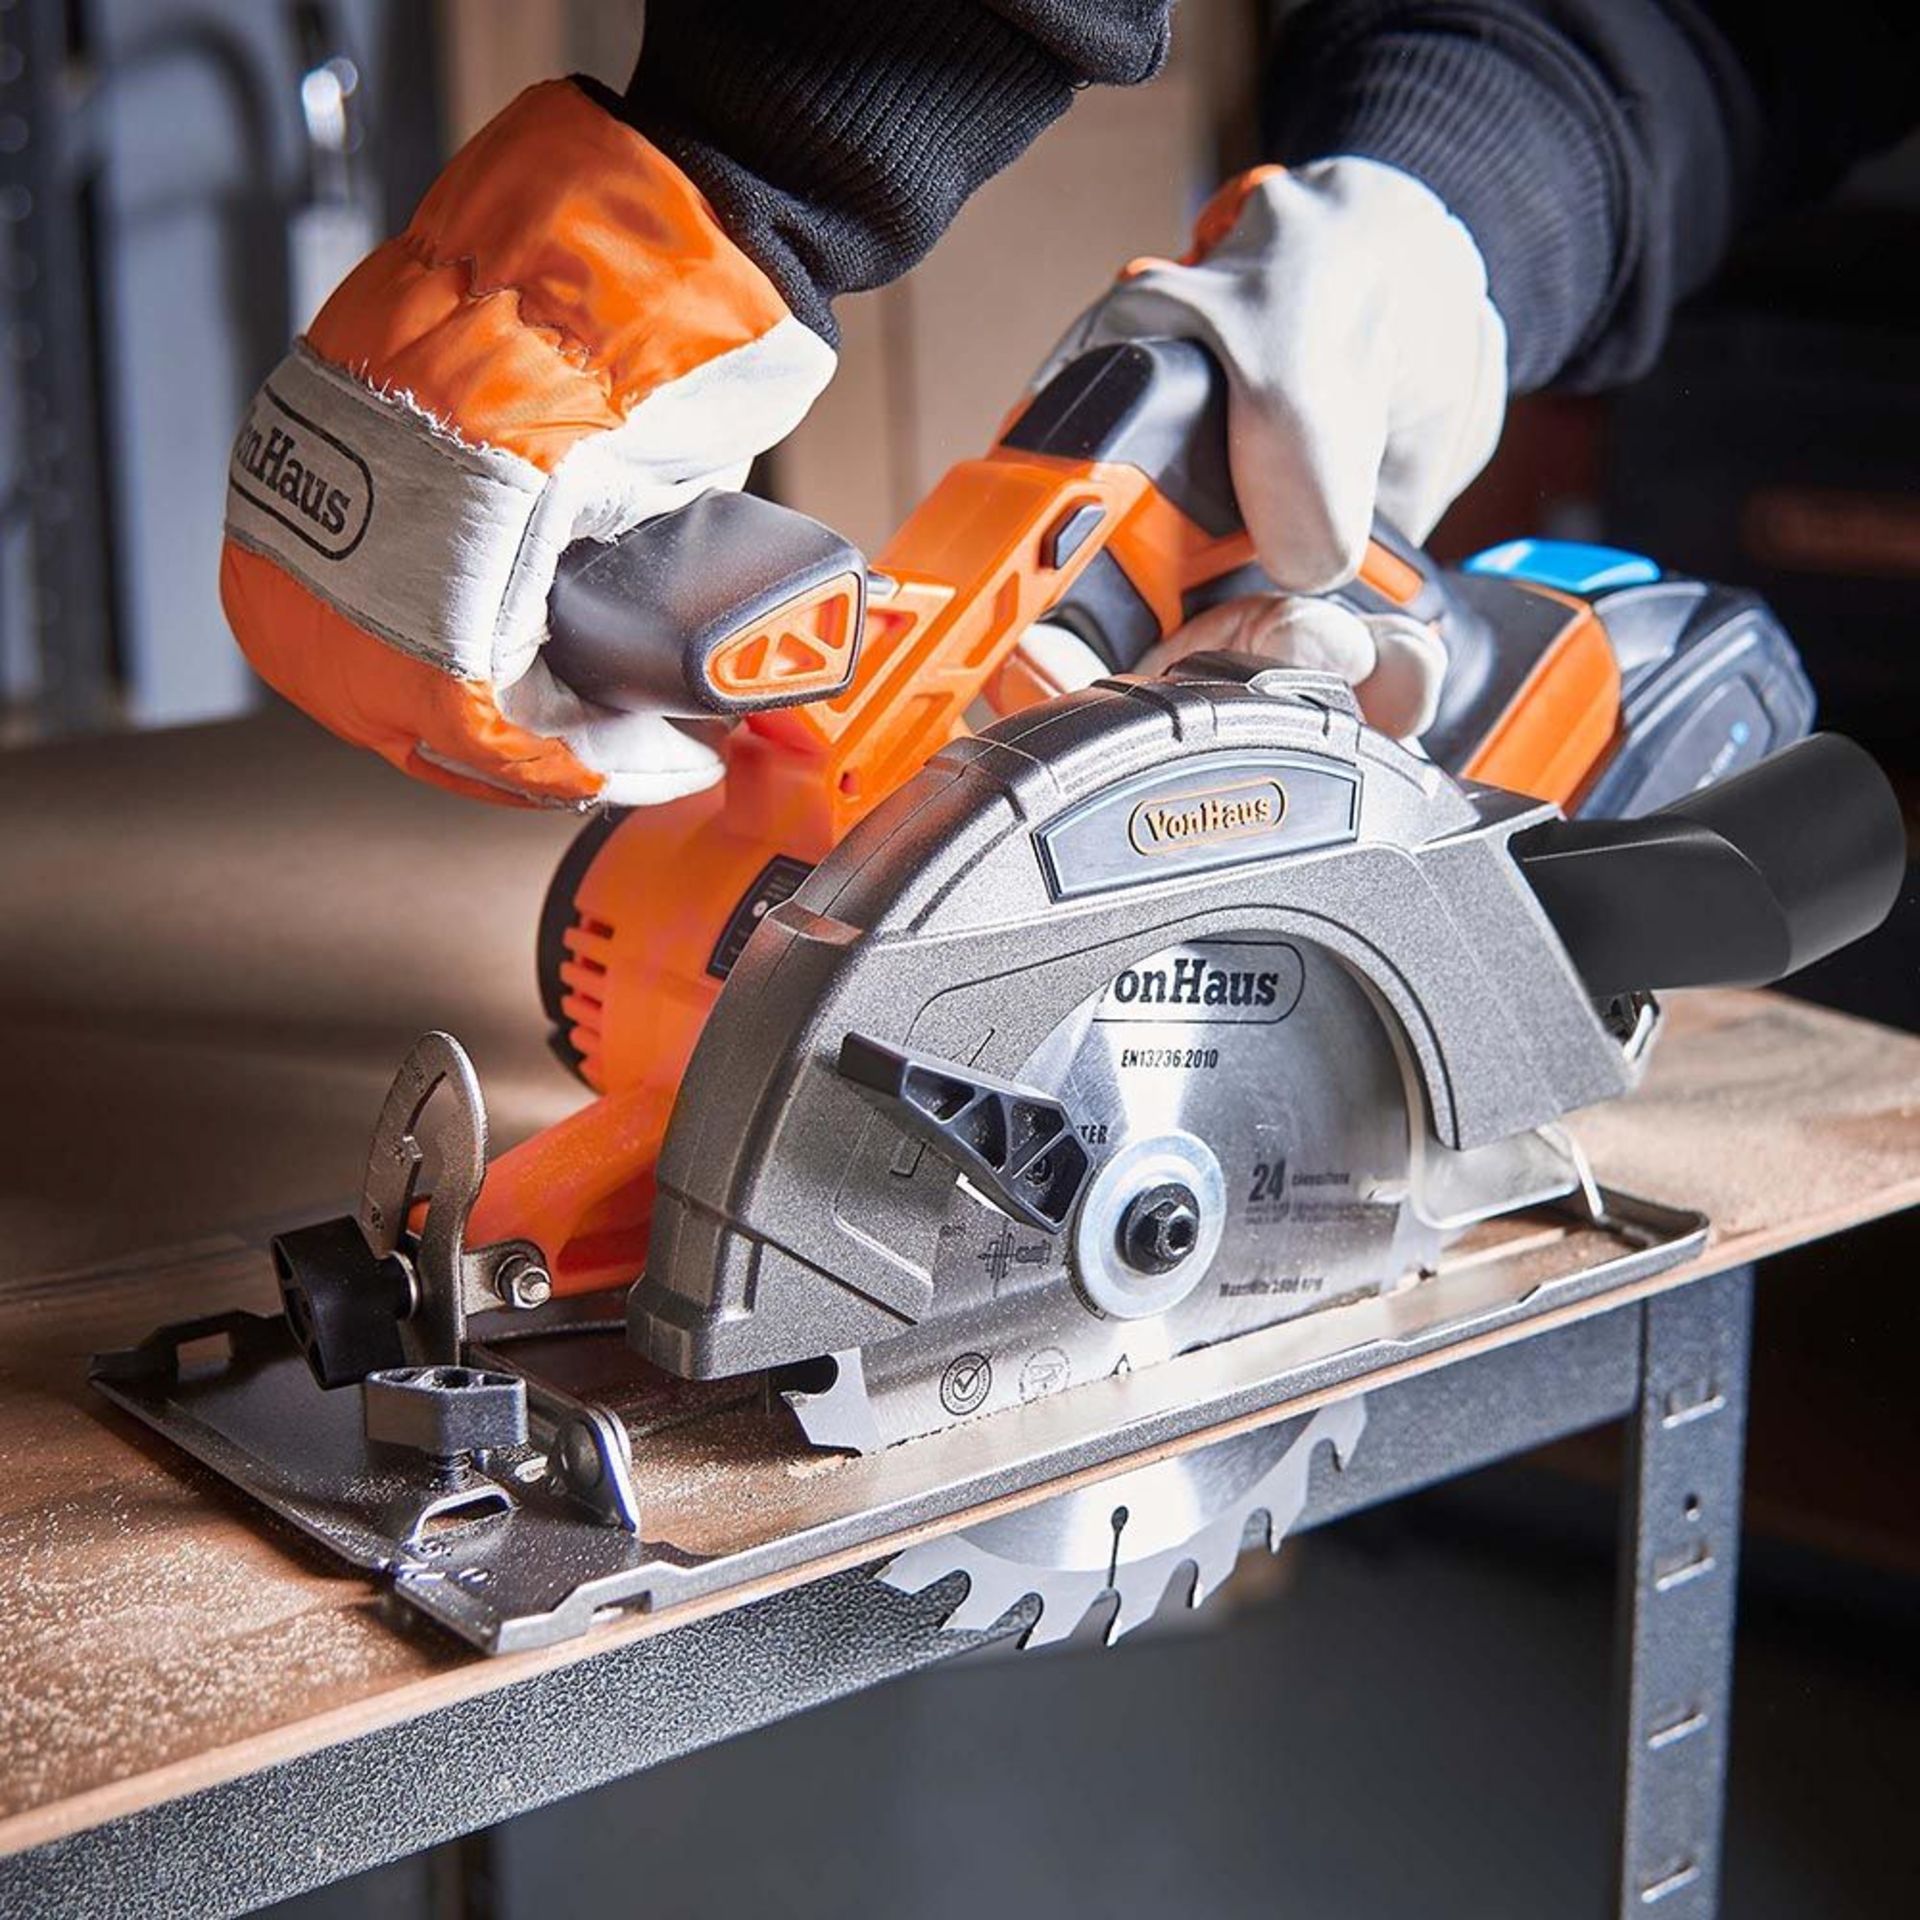 (K11) 20V Max Circular Saw 20V Max 2Ah battery included is compatible with other tools in the ... - Image 2 of 3